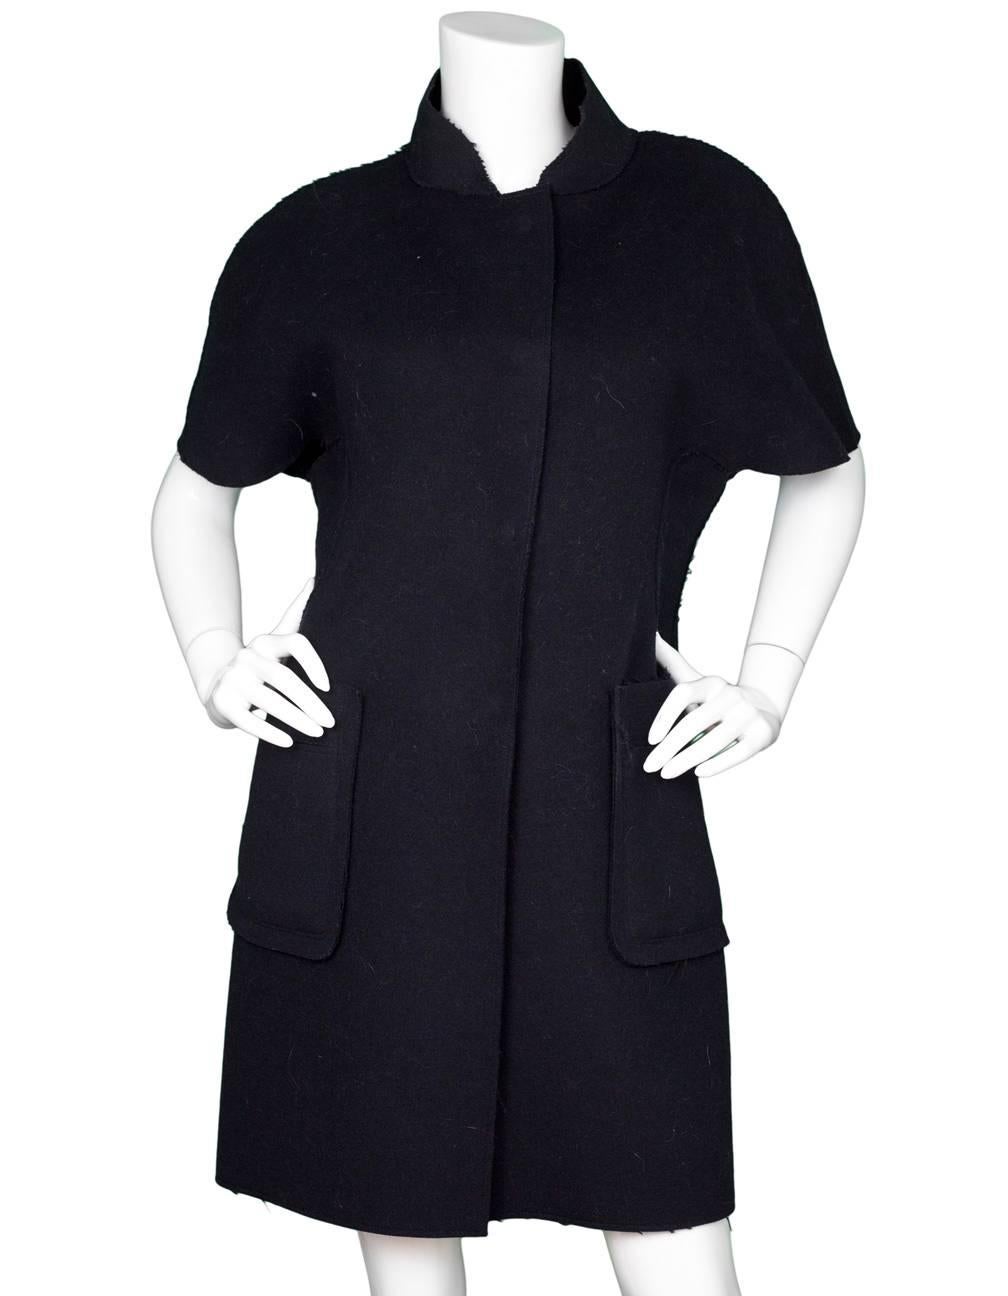 Marni Navy Wool Short Sleeve Coat Sz IT40

Made In: Italy
Color: Navy
Composition: 100% wool
Closure/Opening: Front button closure
Overall Condition: Excellent pre-owned condition
Marked Size: IT40/ US2,4
Bust: 34